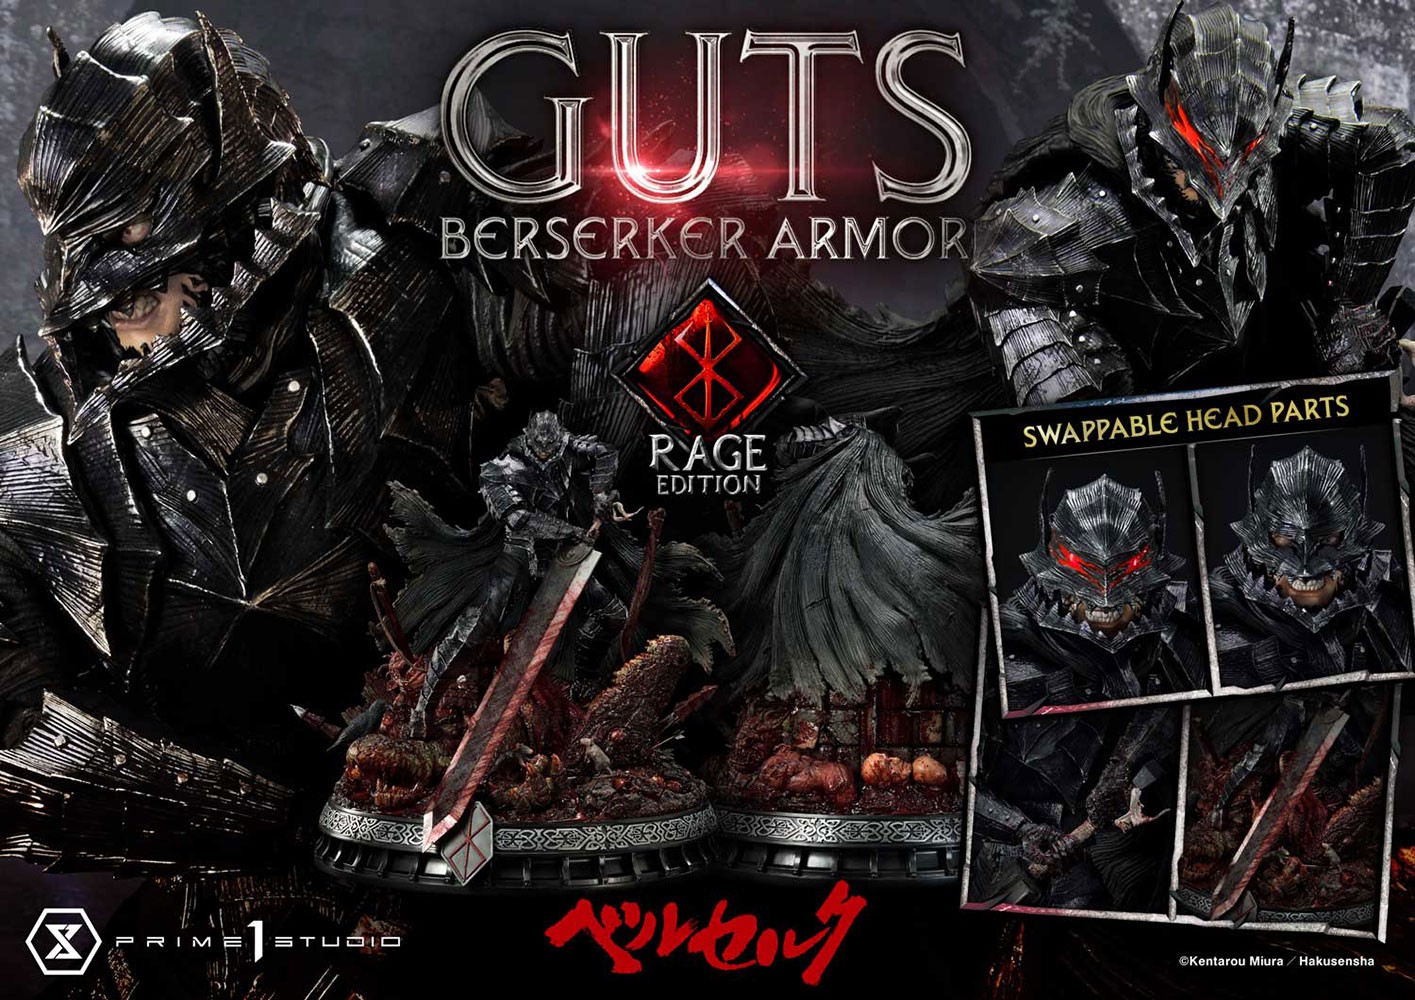 Guts Berserker Armor (Rage Edition) Collector Edition (Prototype Shown) View 27